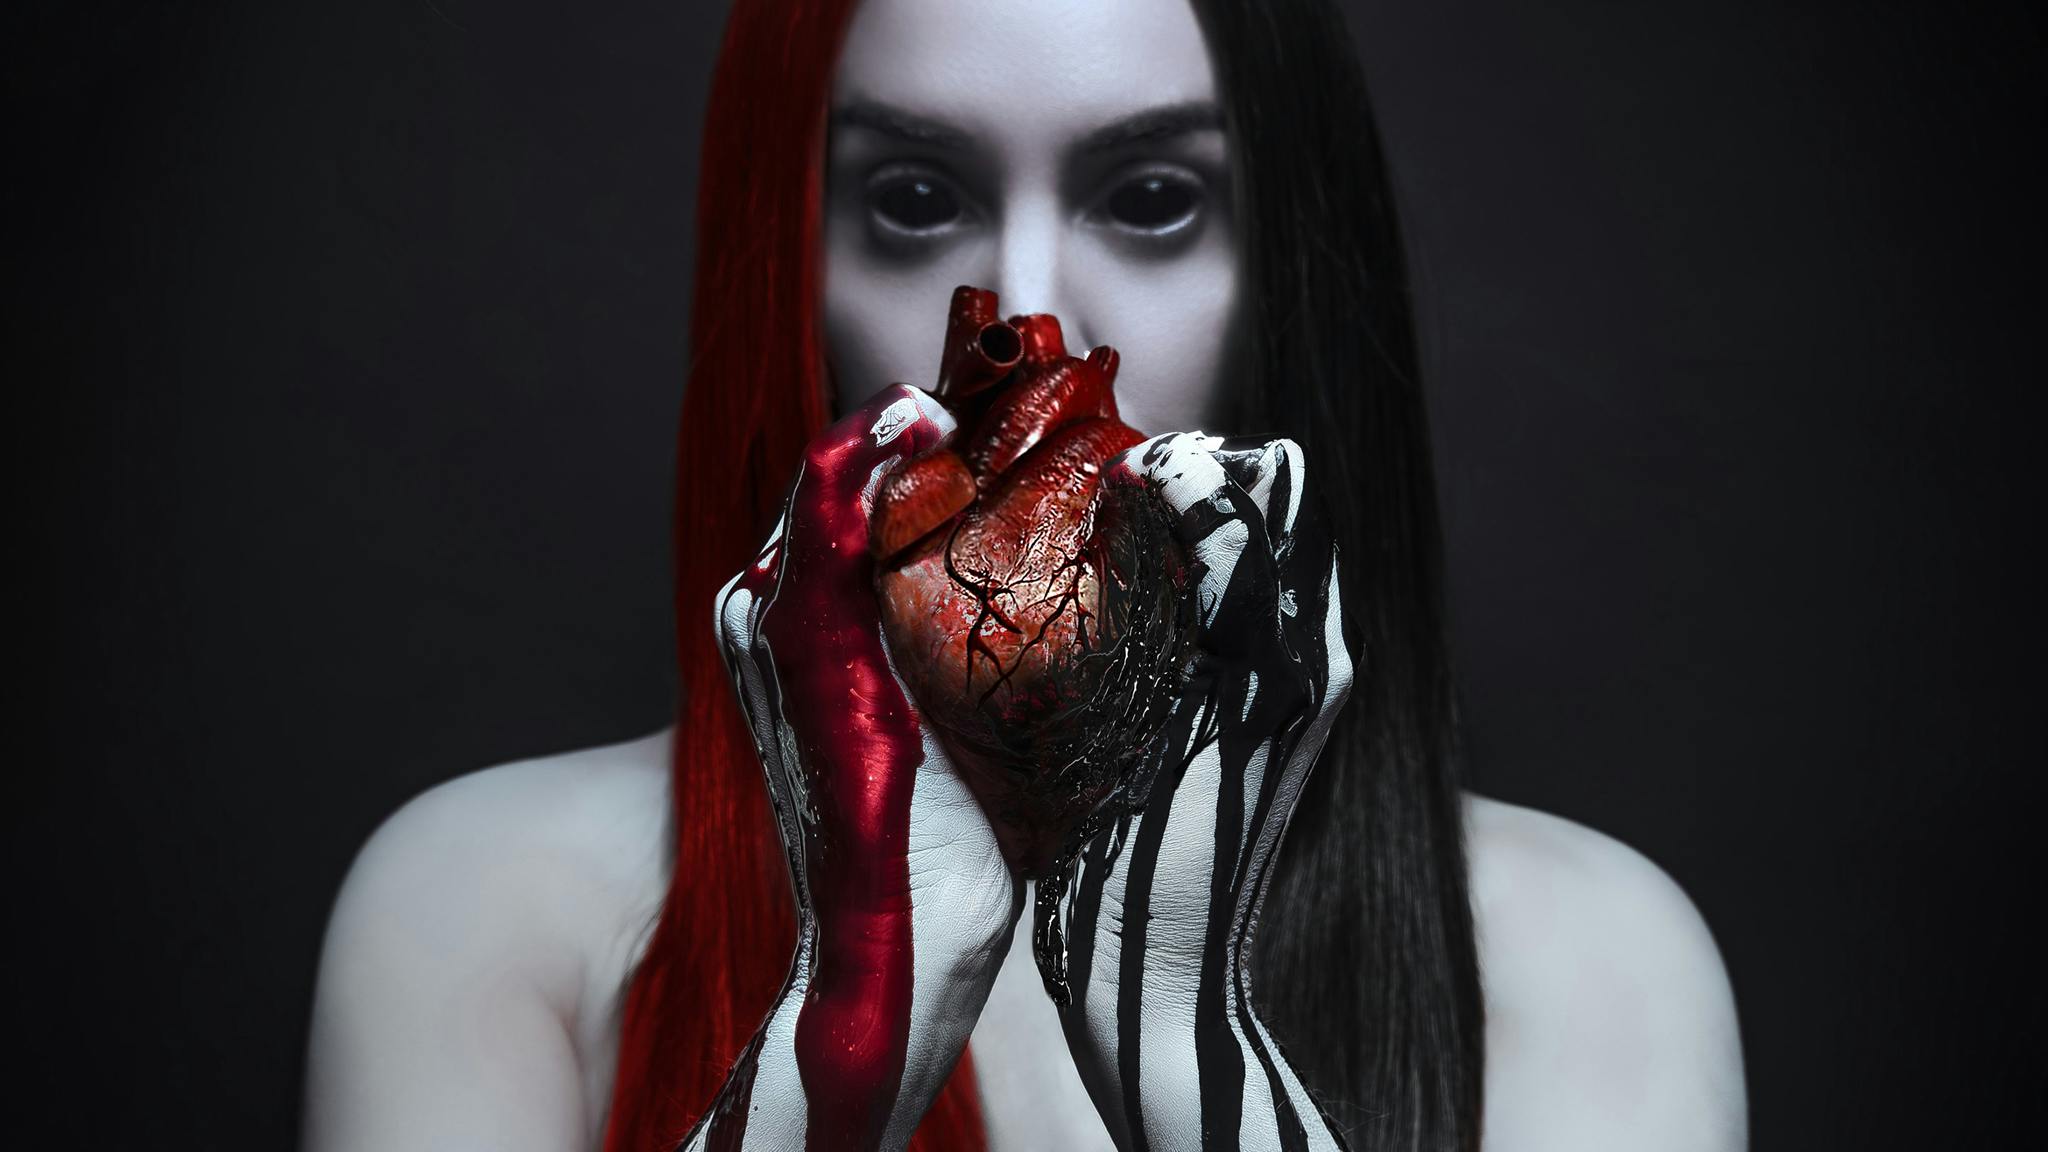 Album review: New Years Day – Half Black Heart